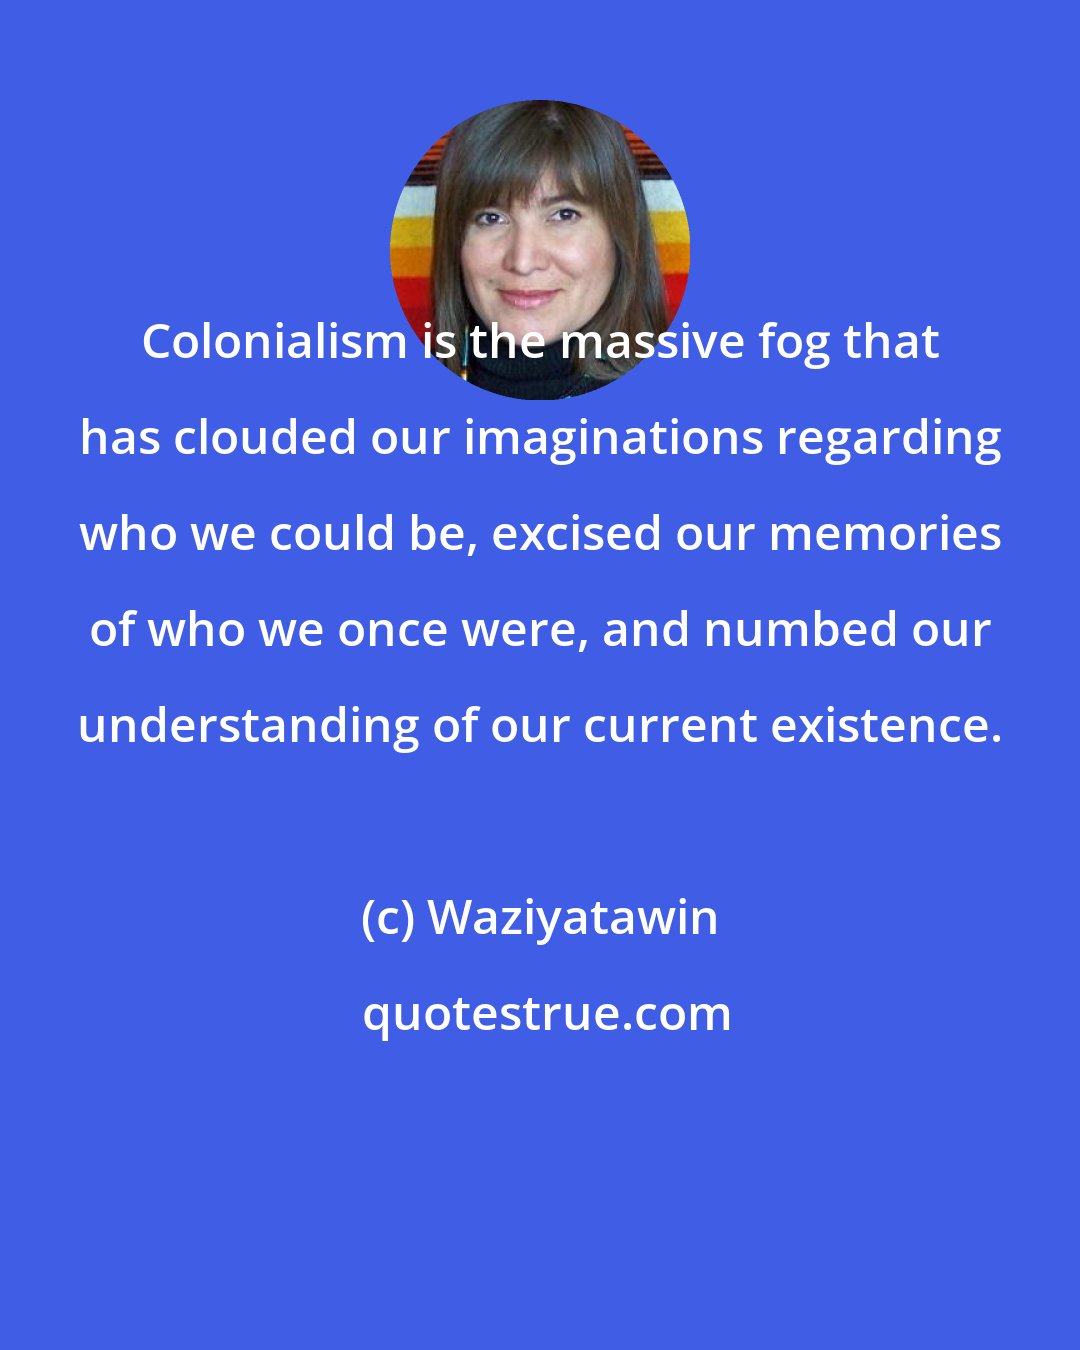 Waziyatawin: Colonialism is the massive fog that has clouded our imaginations regarding who we could be, excised our memories of who we once were, and numbed our understanding of our current existence.